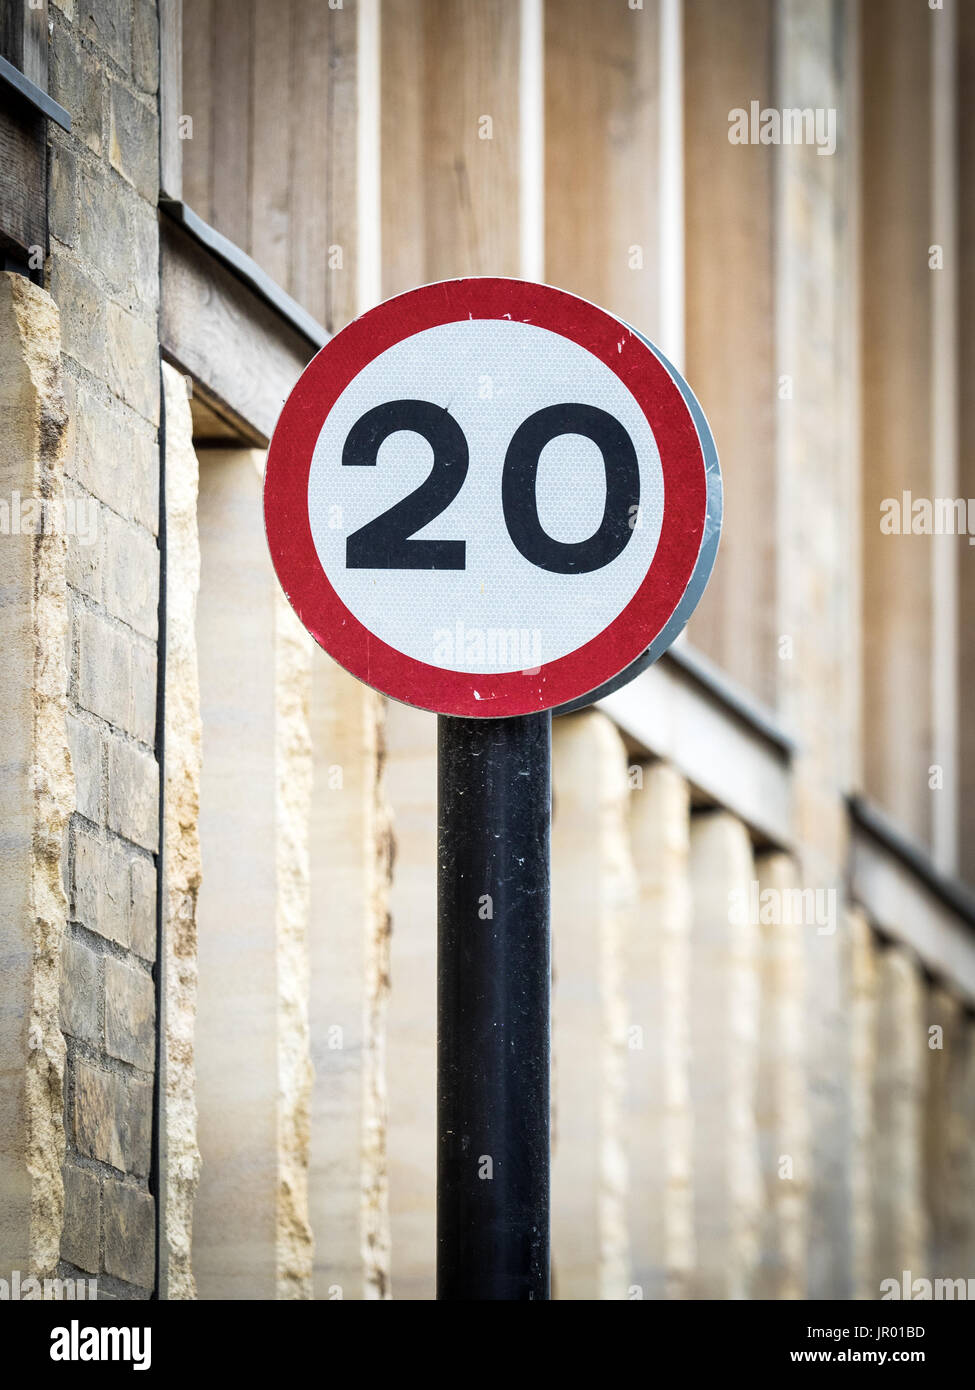 20MPH Speed Limit Signs - 20 mph speed restriction zones are more common in UK Cities now Stock Photo